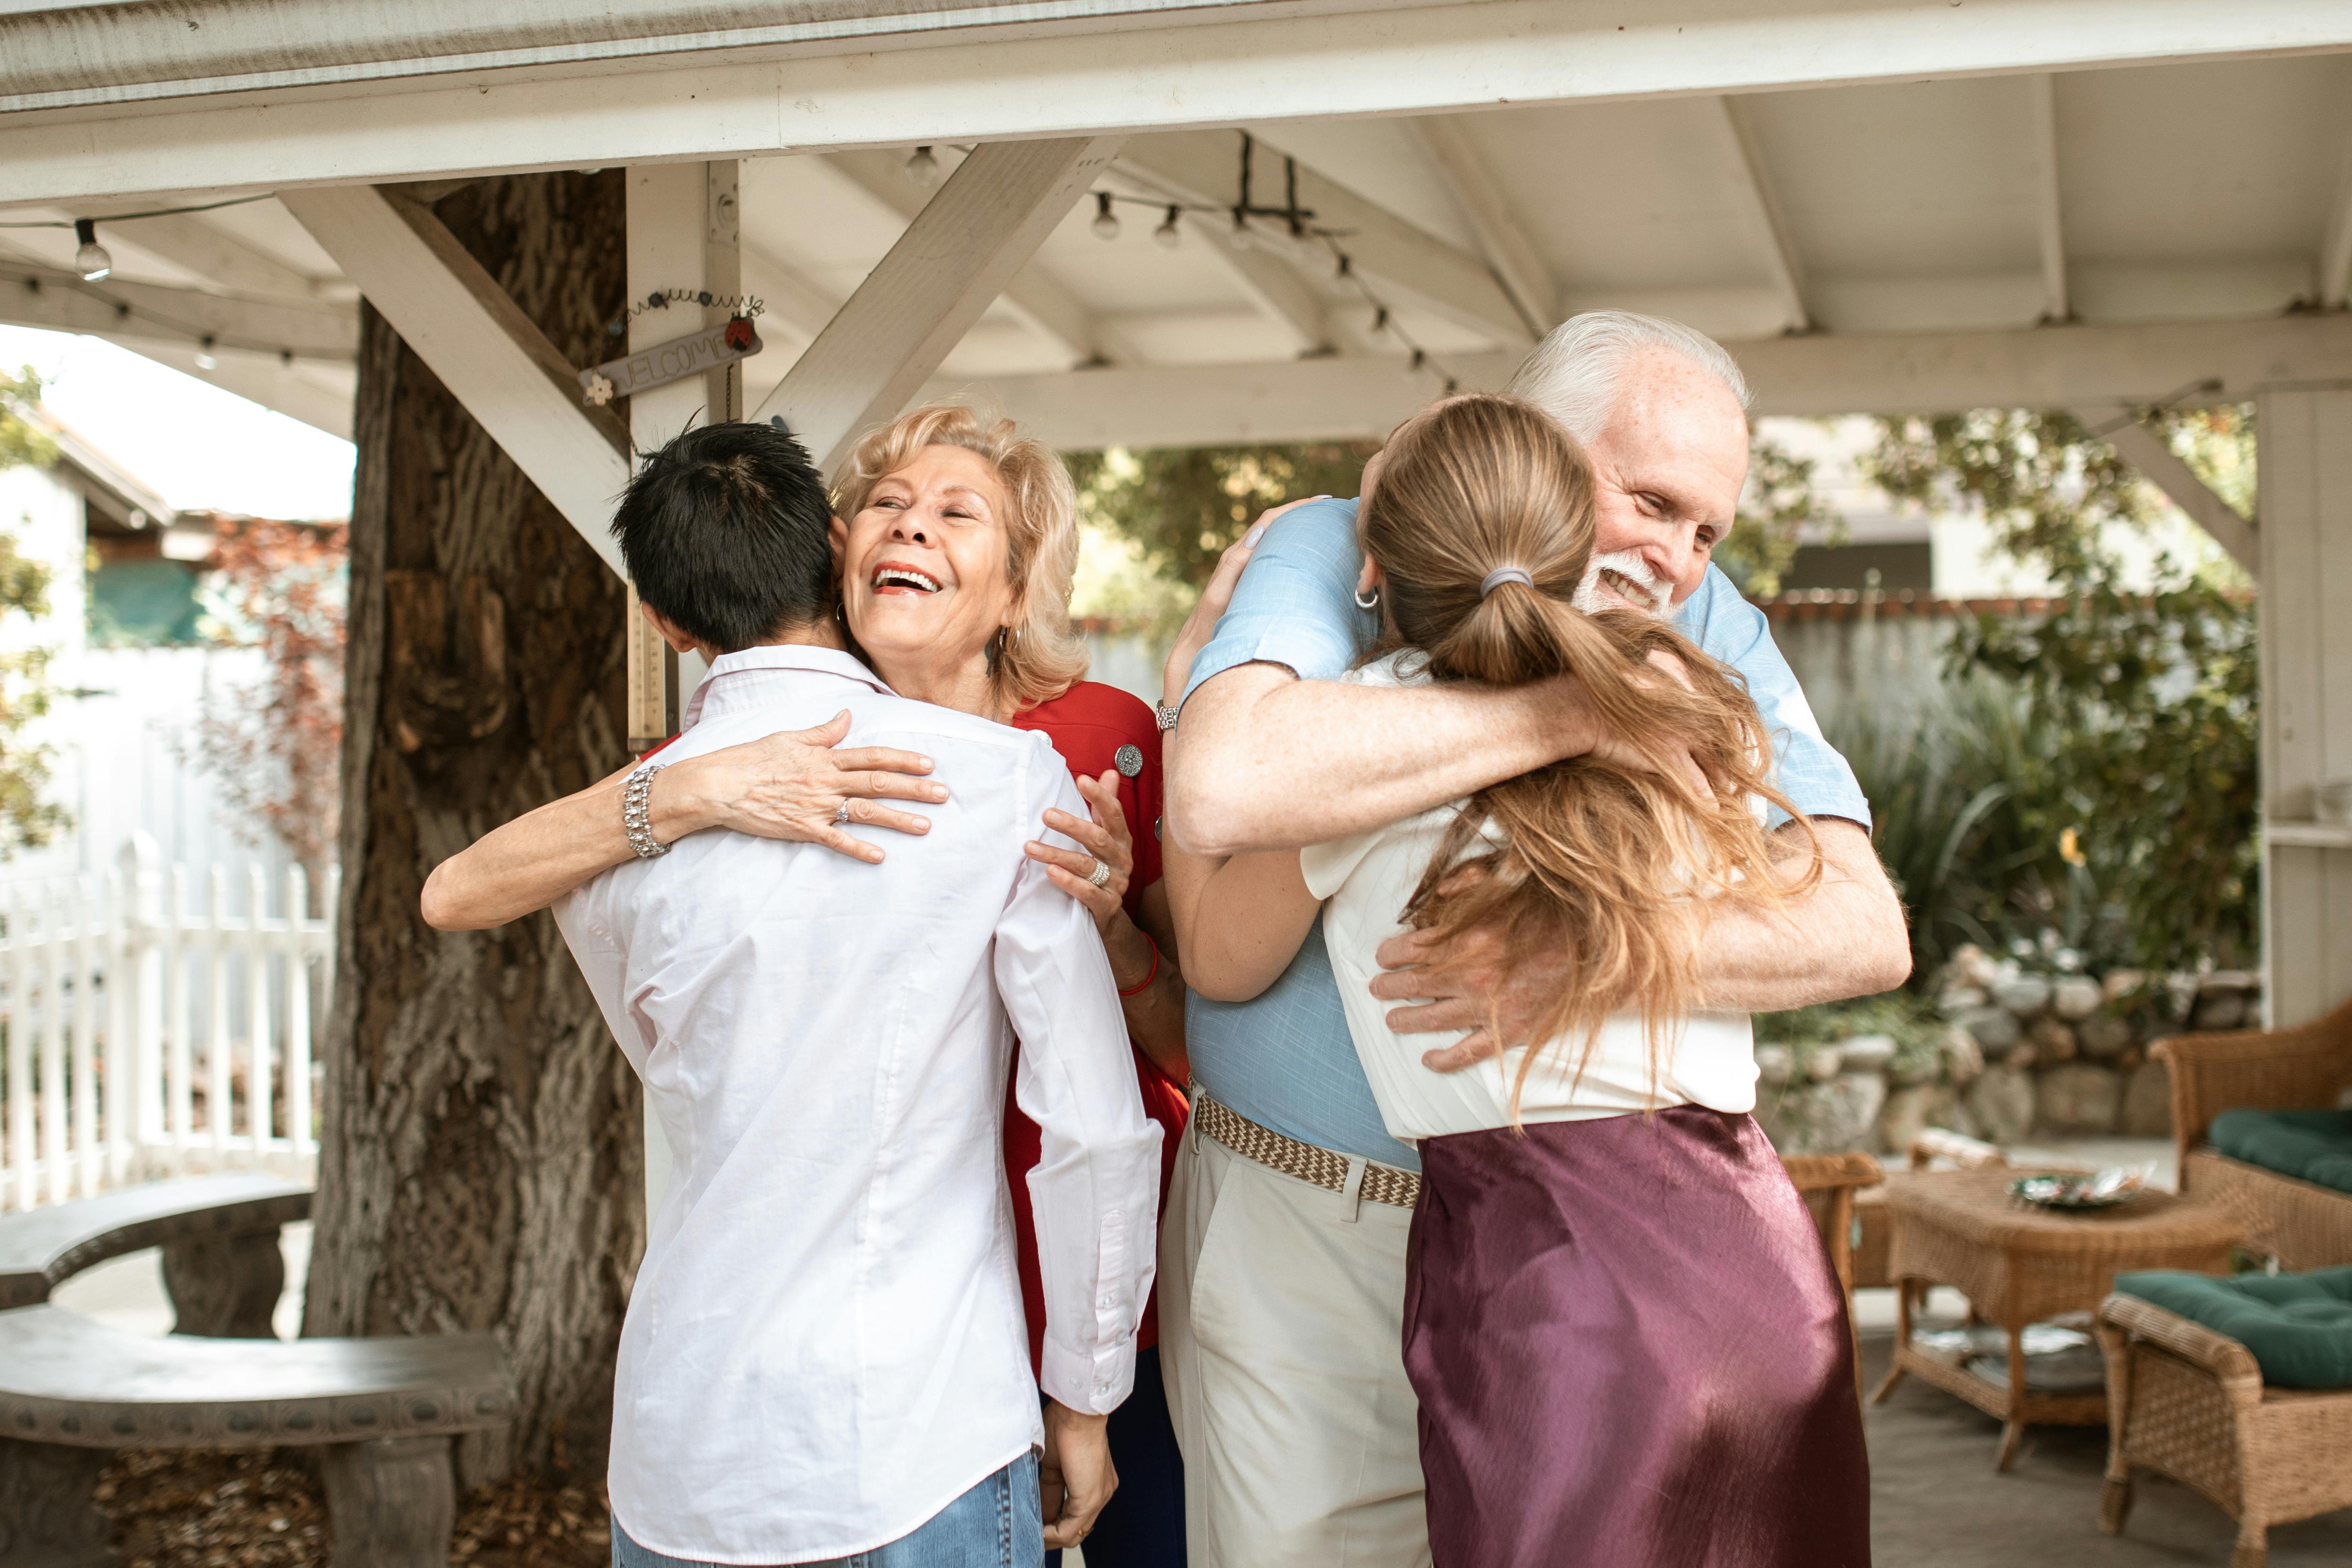 A family of four sharing hugs | Source: Pexels